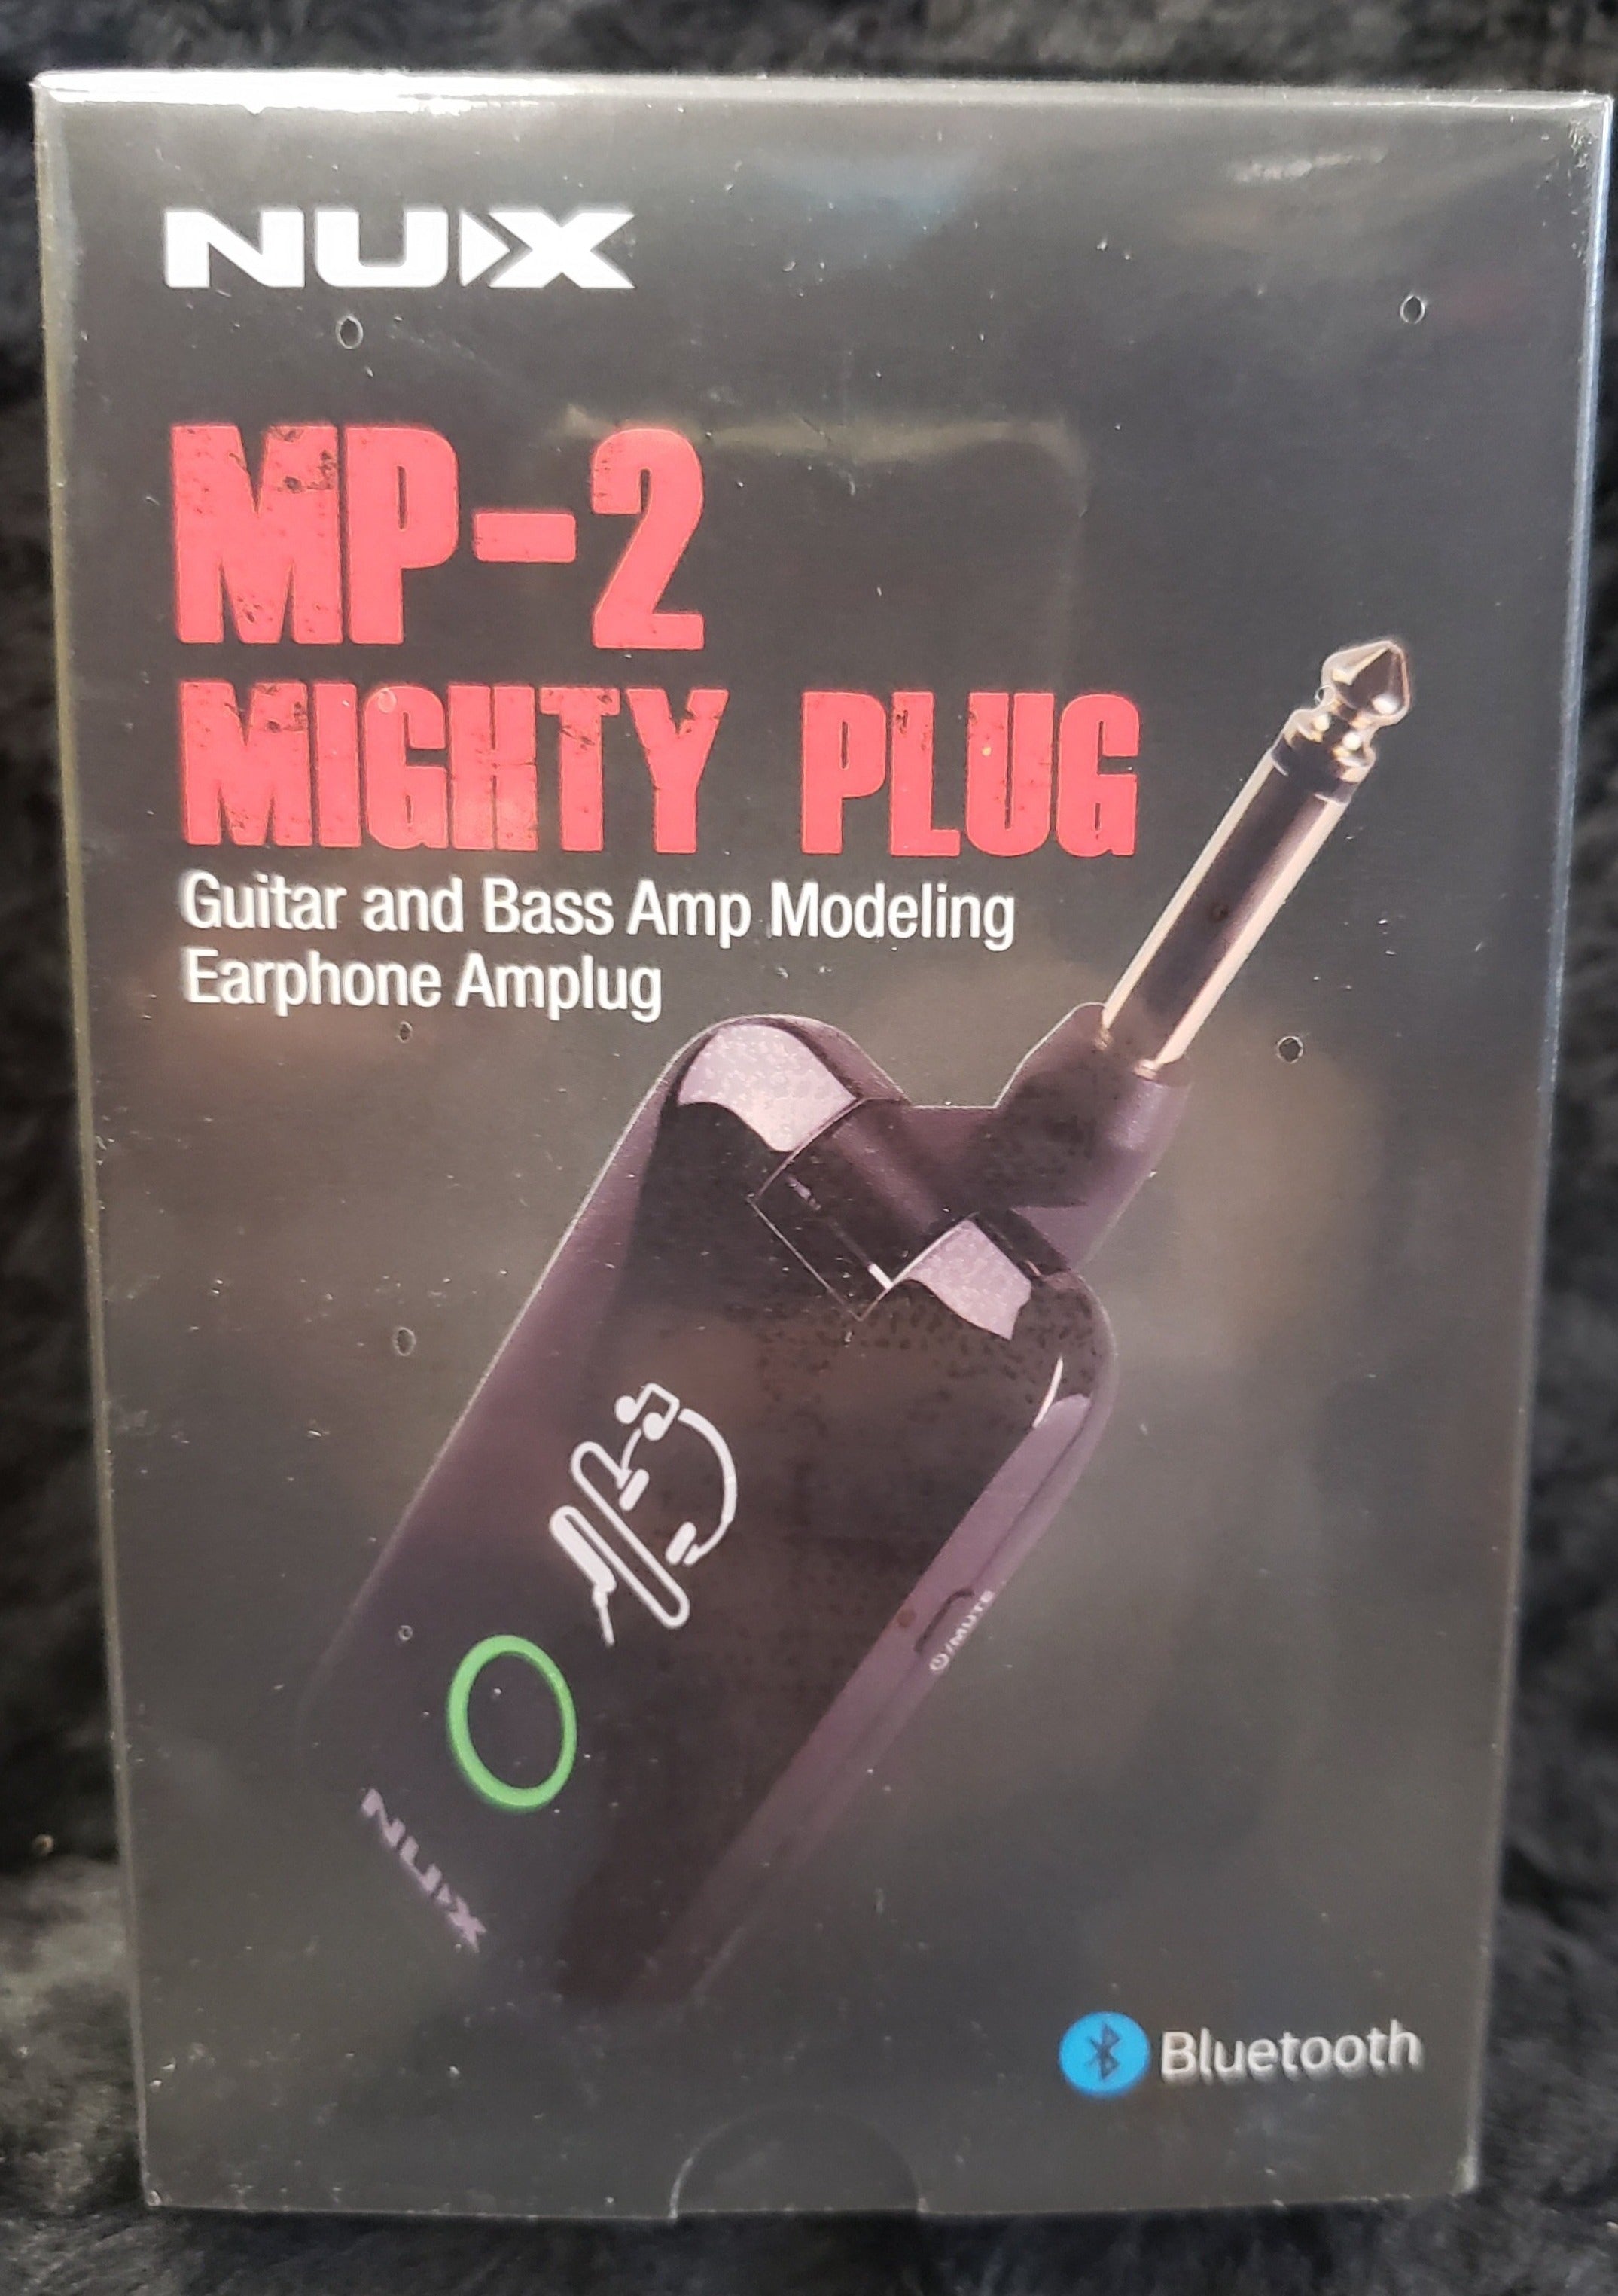 NUX Wireless Bluetooth Headphone Guitar and Bass Amplifier MIGHTY-PLUG MP-2